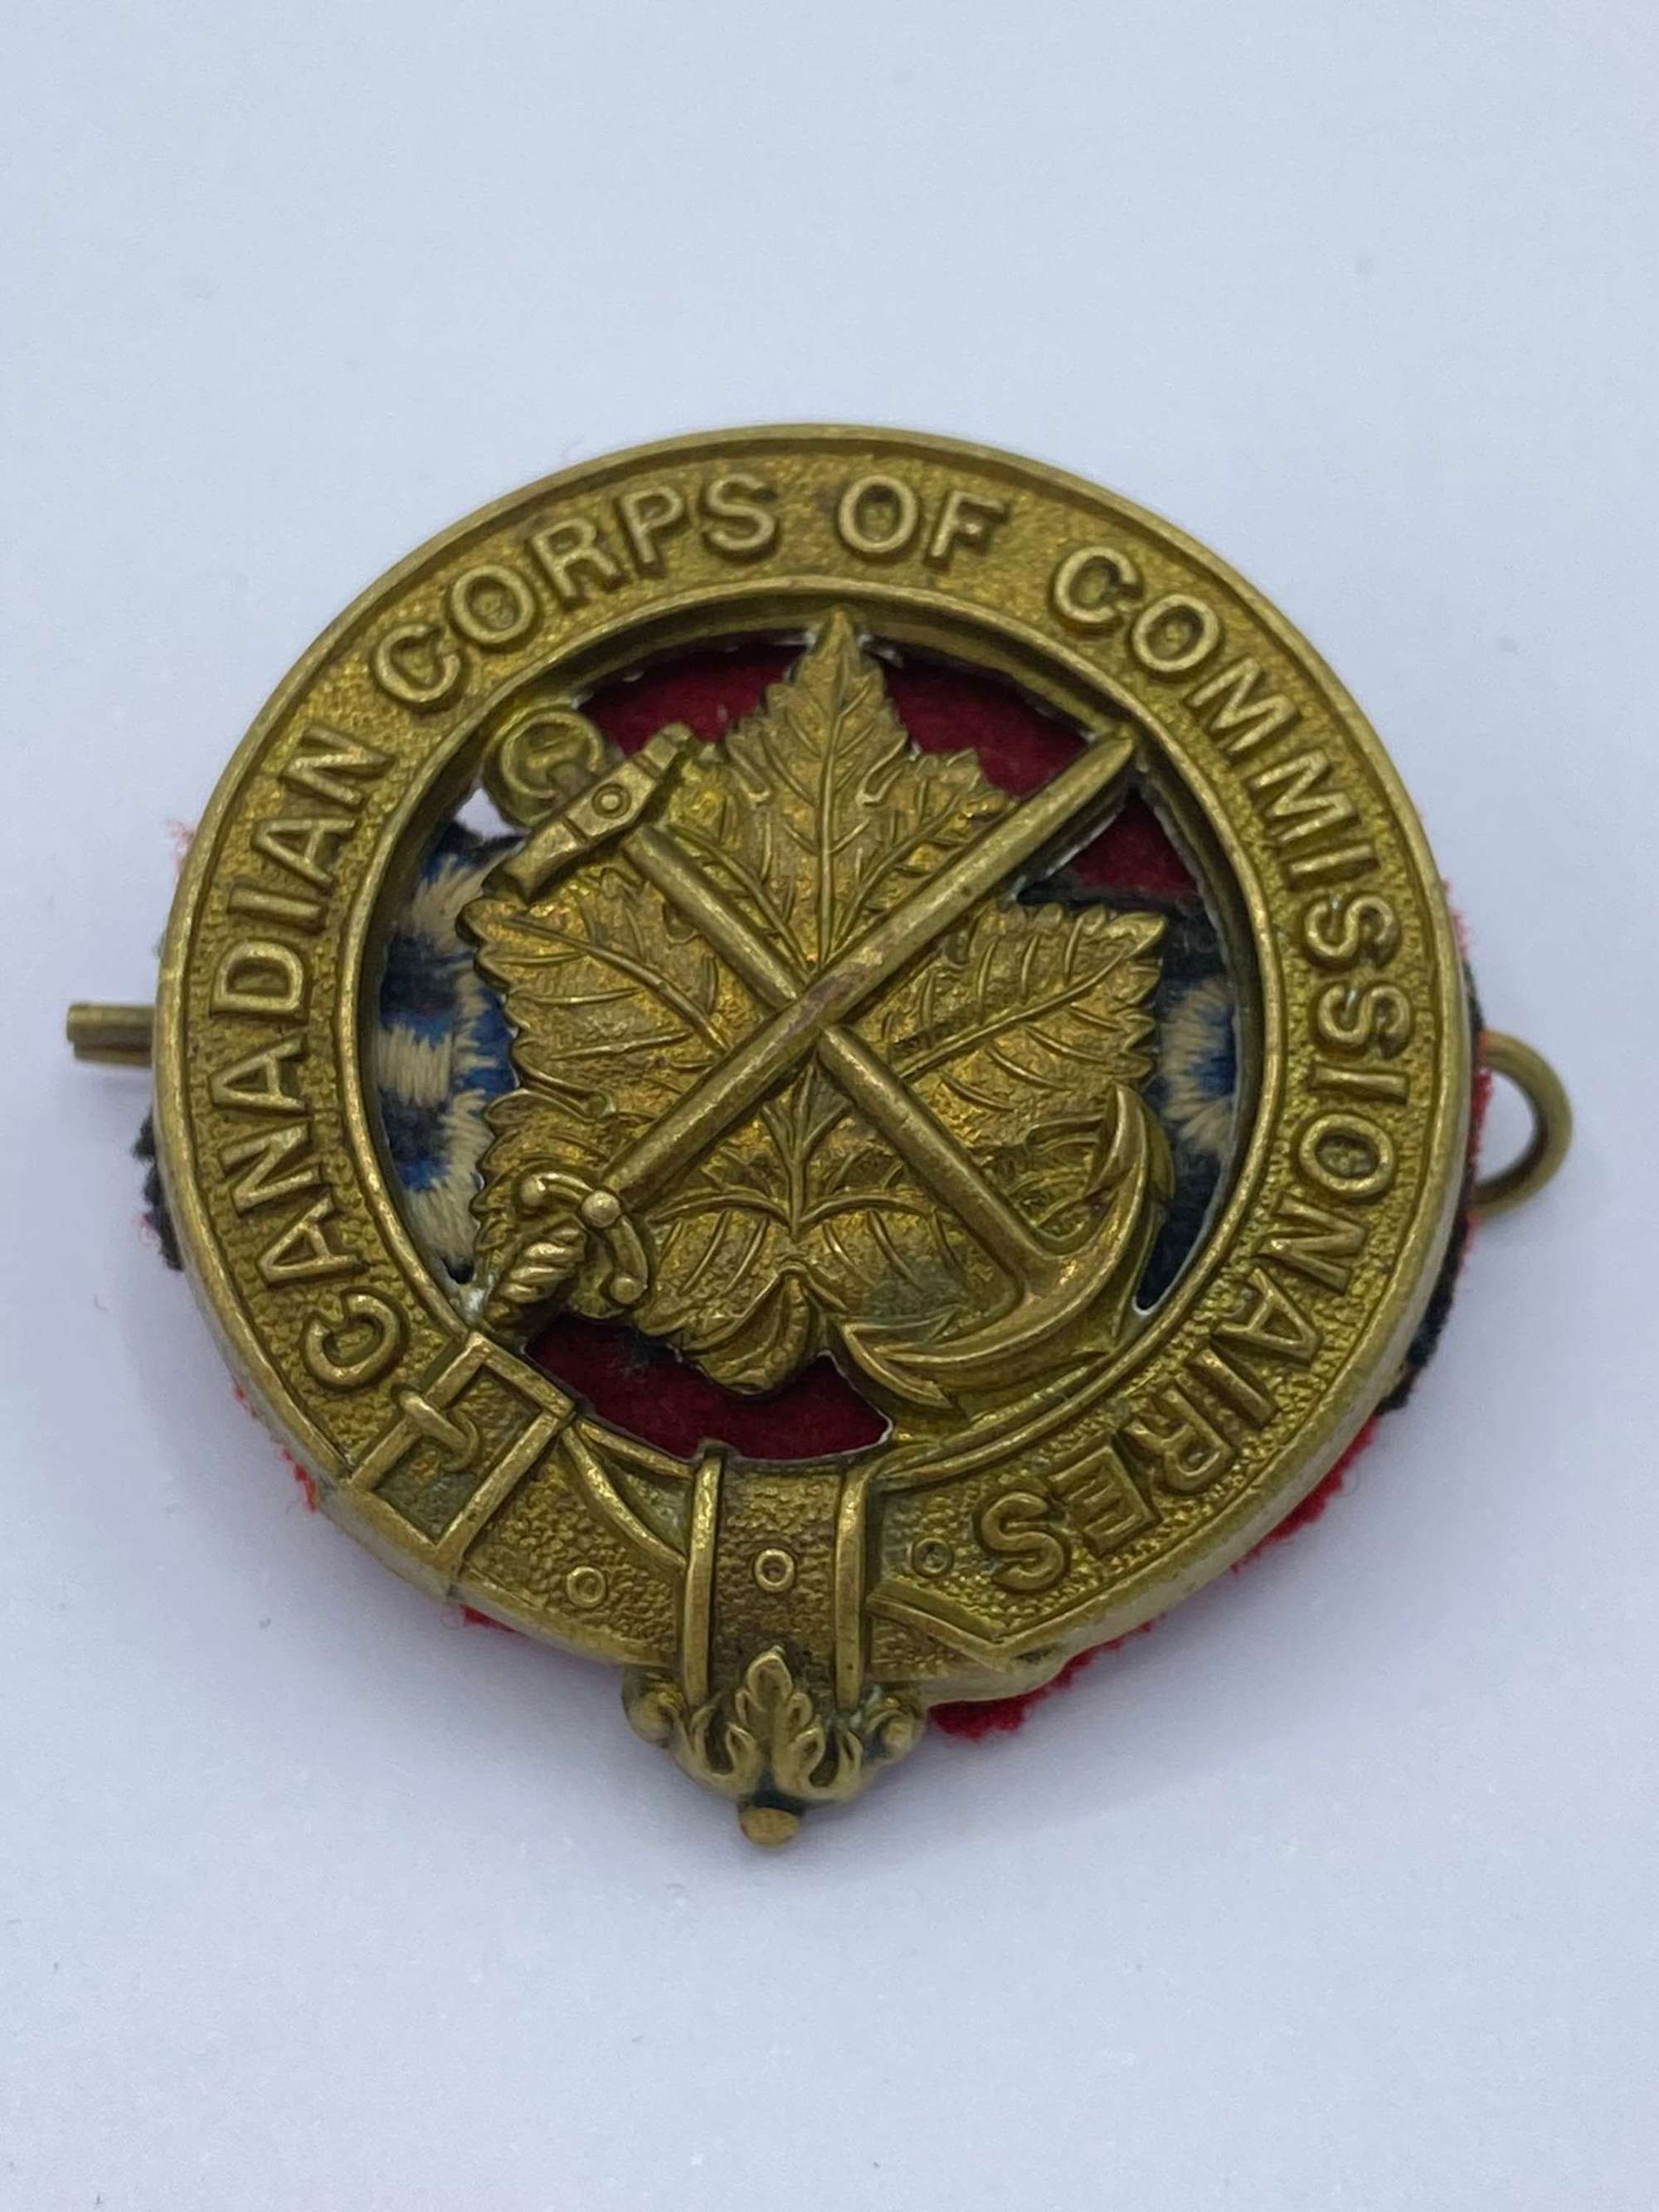 WW2 Canadian Corps of Commissionaires Cap Badge With Unusual Backing